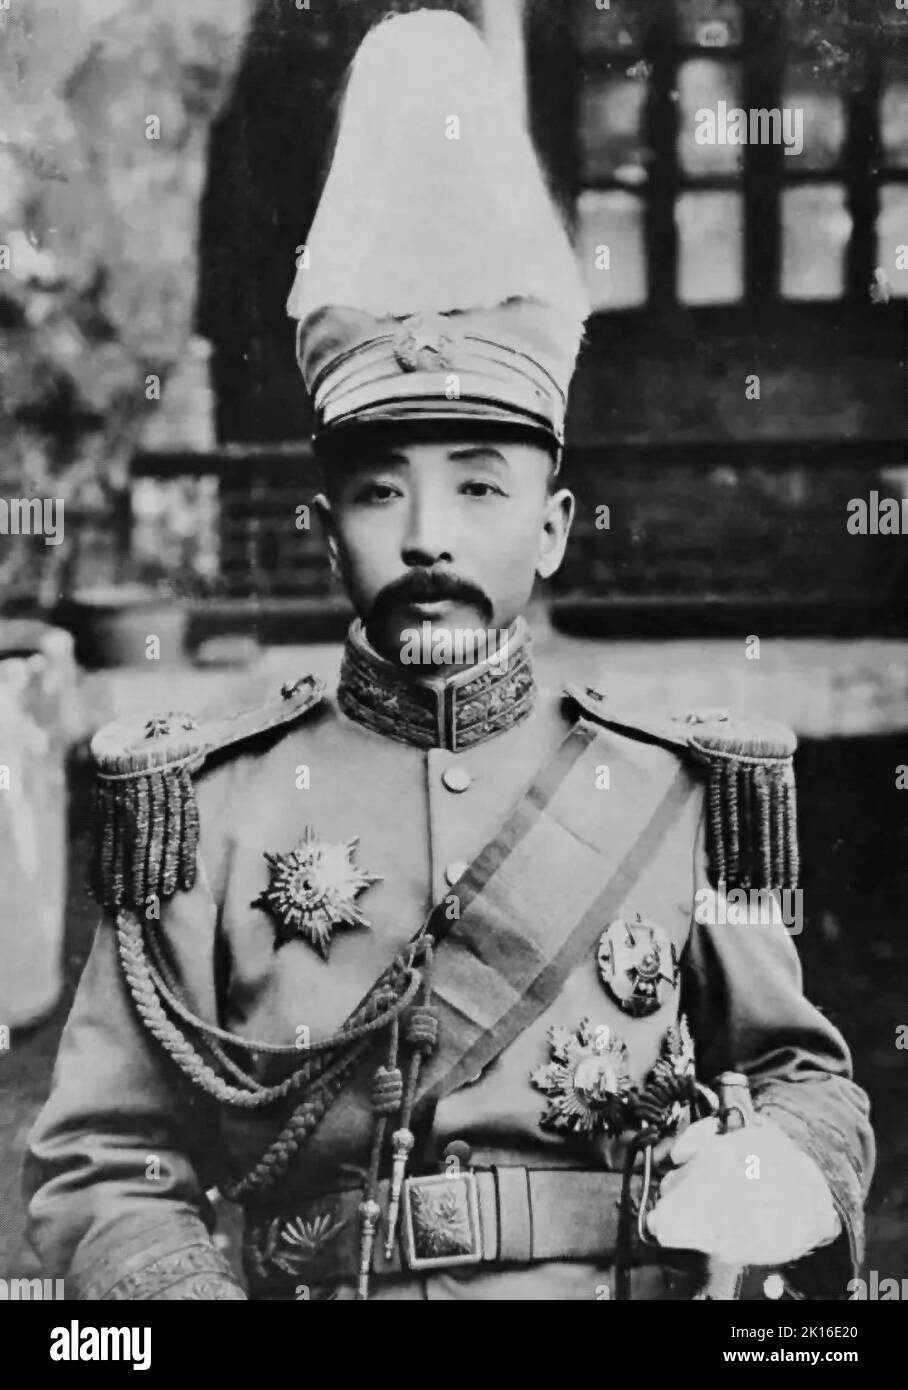 Portrait of Zhang Zuolin (1875–1928)  c1920, an influential Chinese bandit, soldier, and the warlord of Manchuria from 1916 to 1928, the military dictator of the Republic of China in 1927 and 1928. He was assassinated Huanggutun incident (June 4th,1928).  It was concealed as 'A Certain Important Incident in Manchuria'. Stock Photo